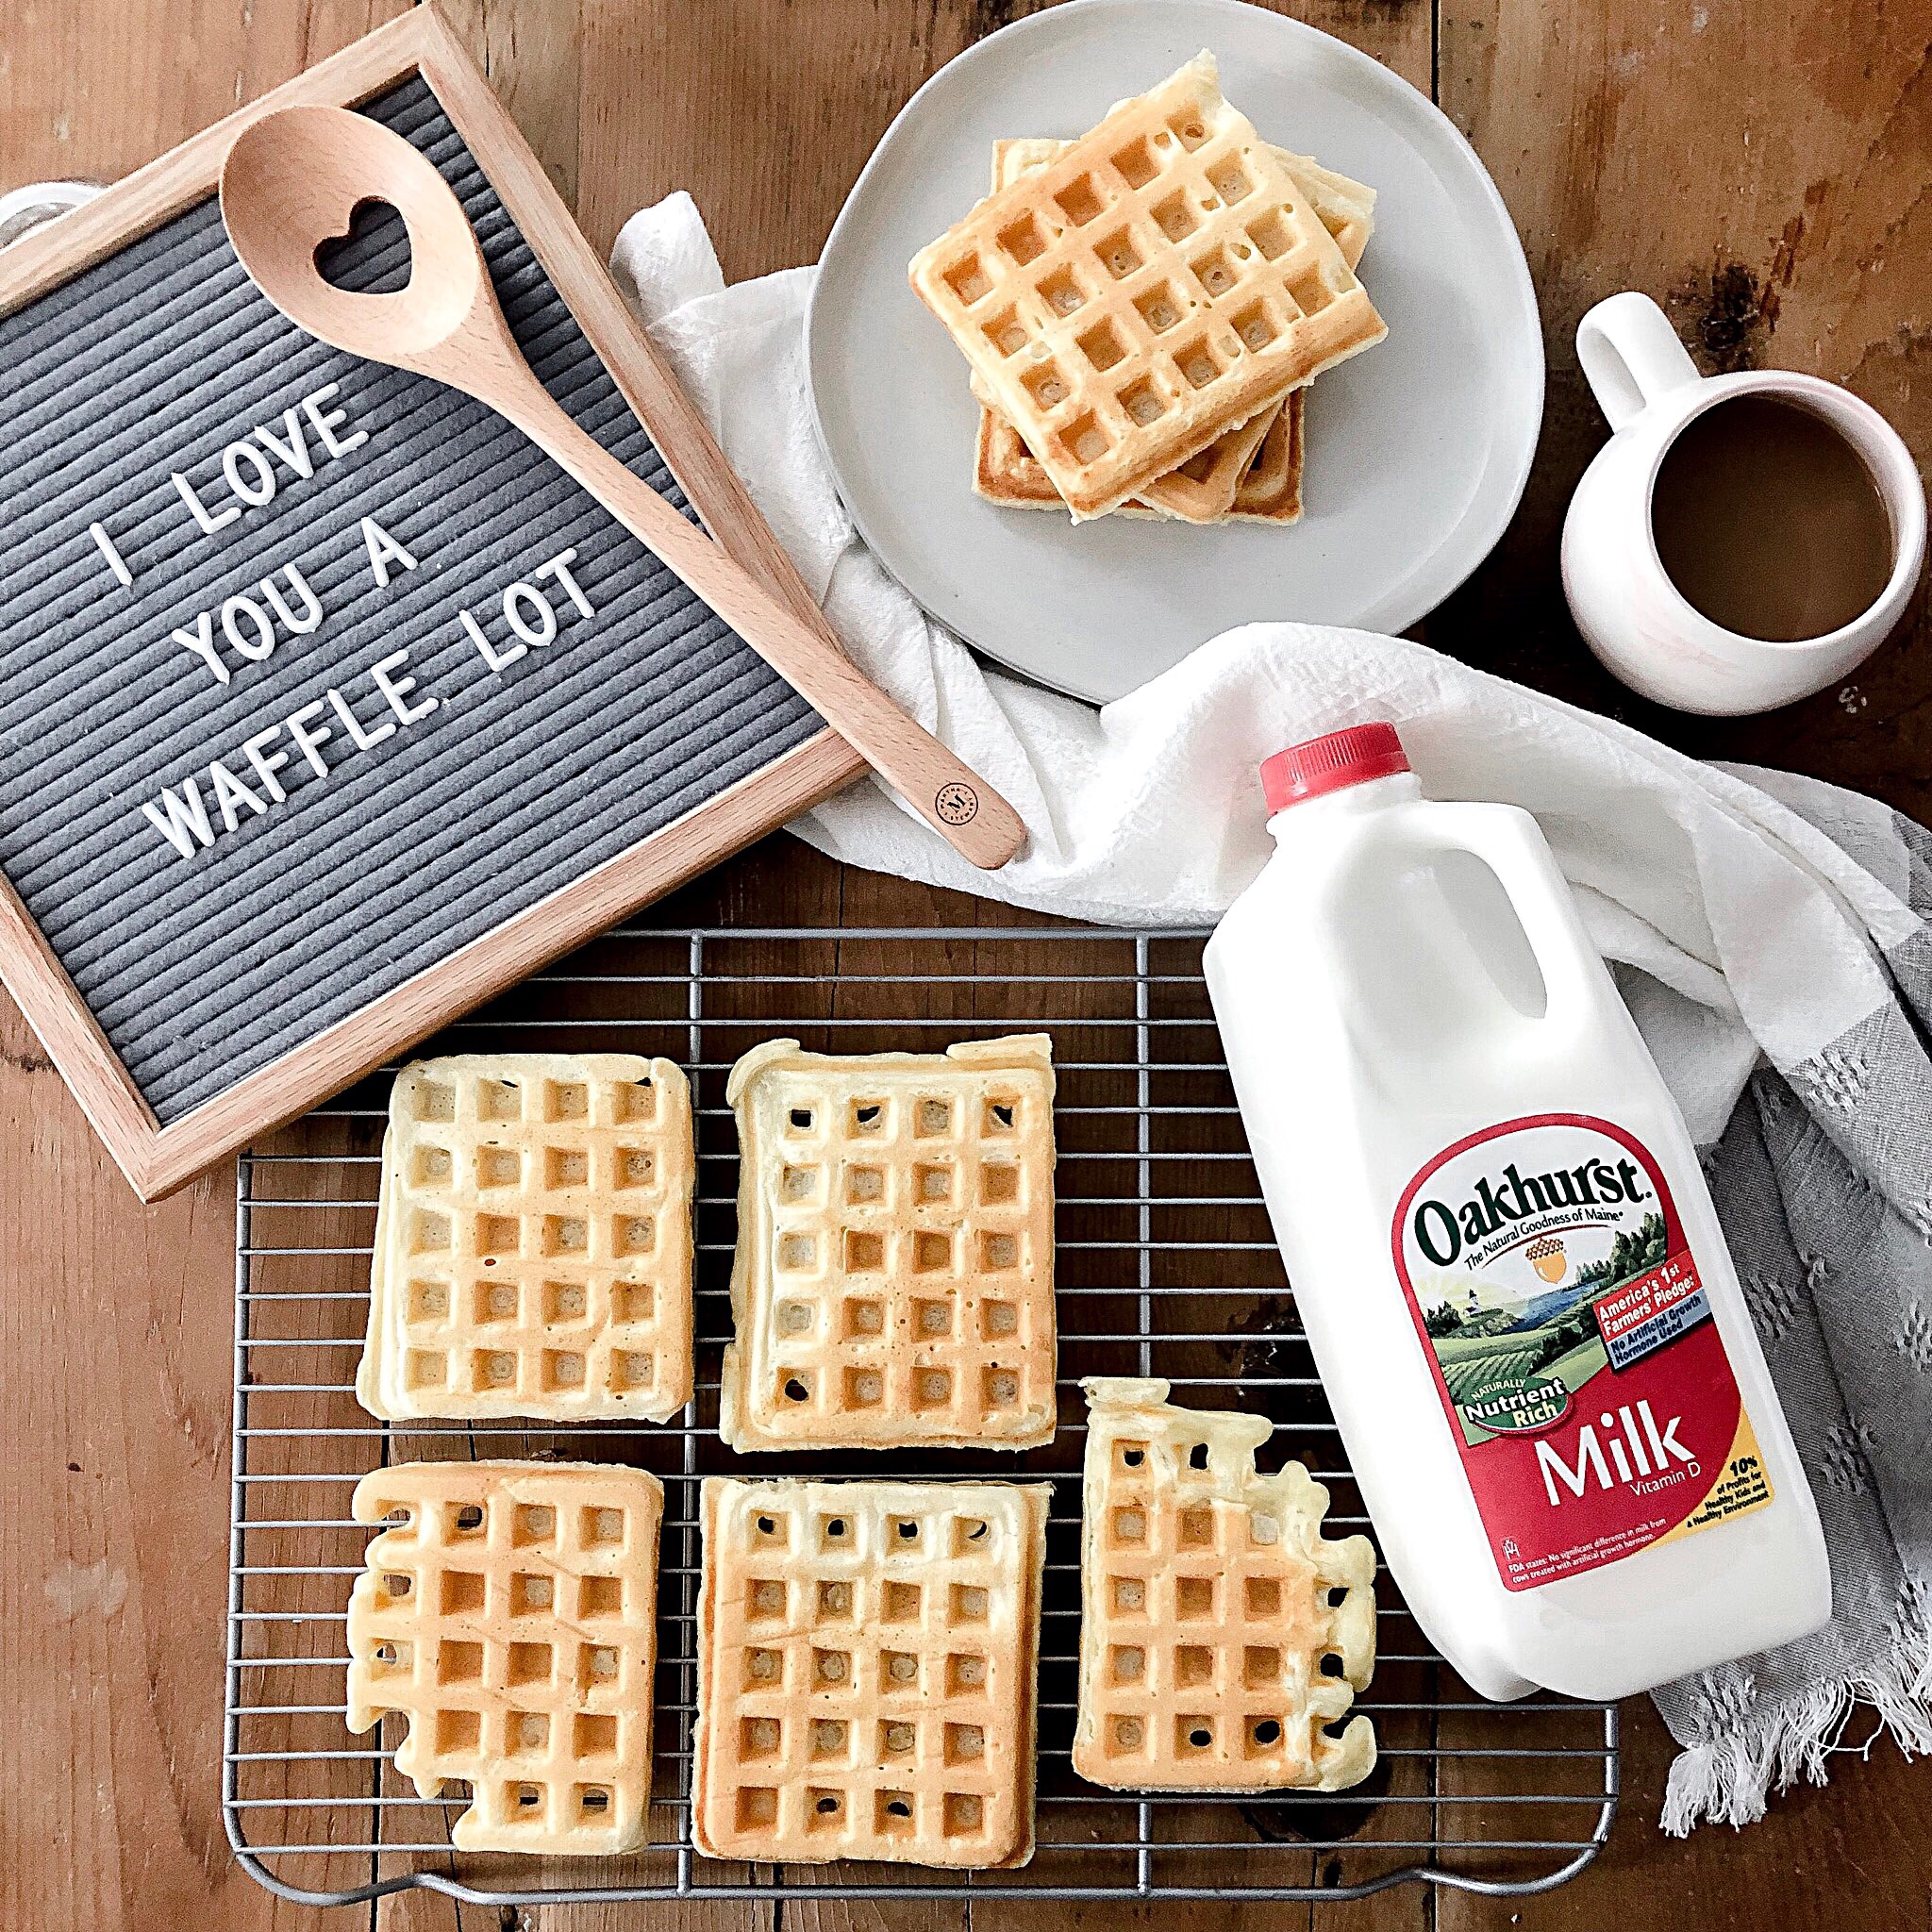 Freezer Friendly Waffles with Oakhurst - From the Family